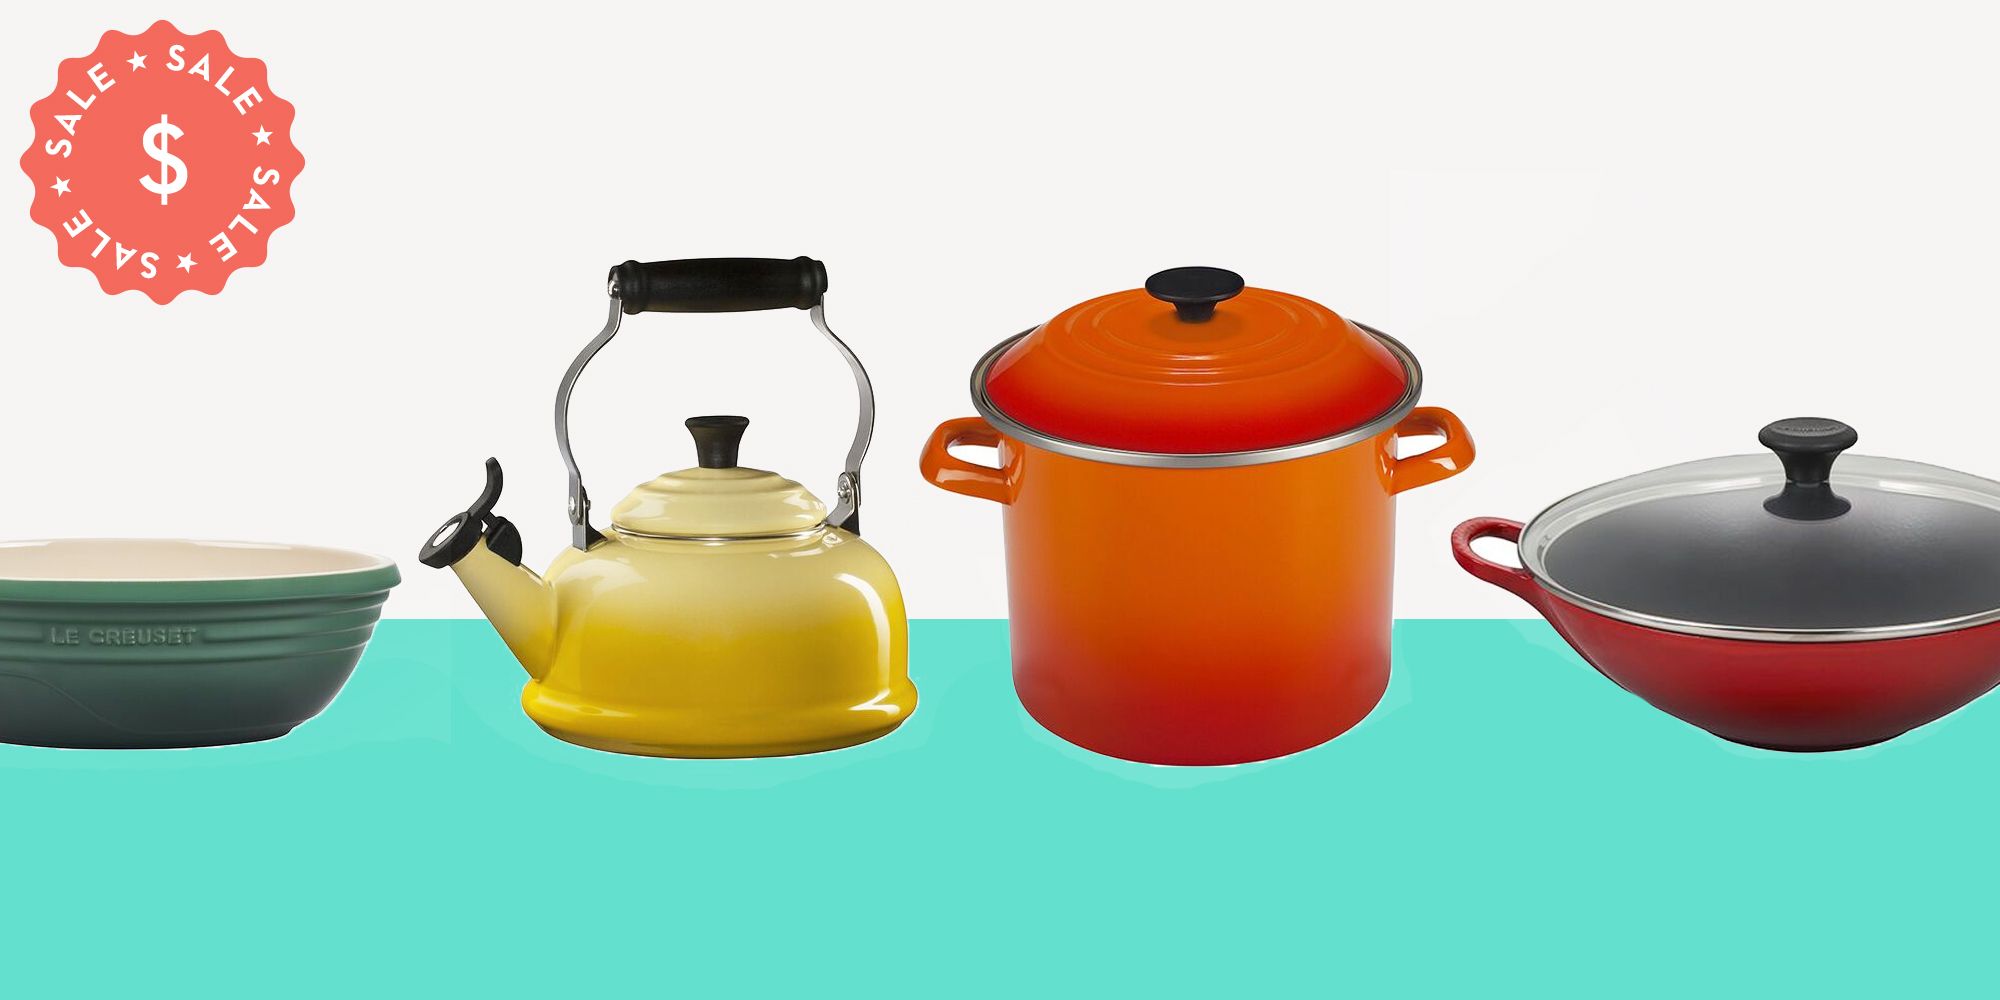 Intakt reparere Et kors You Can Save Up to 70% at Le Creuset's Huge Factory Sale